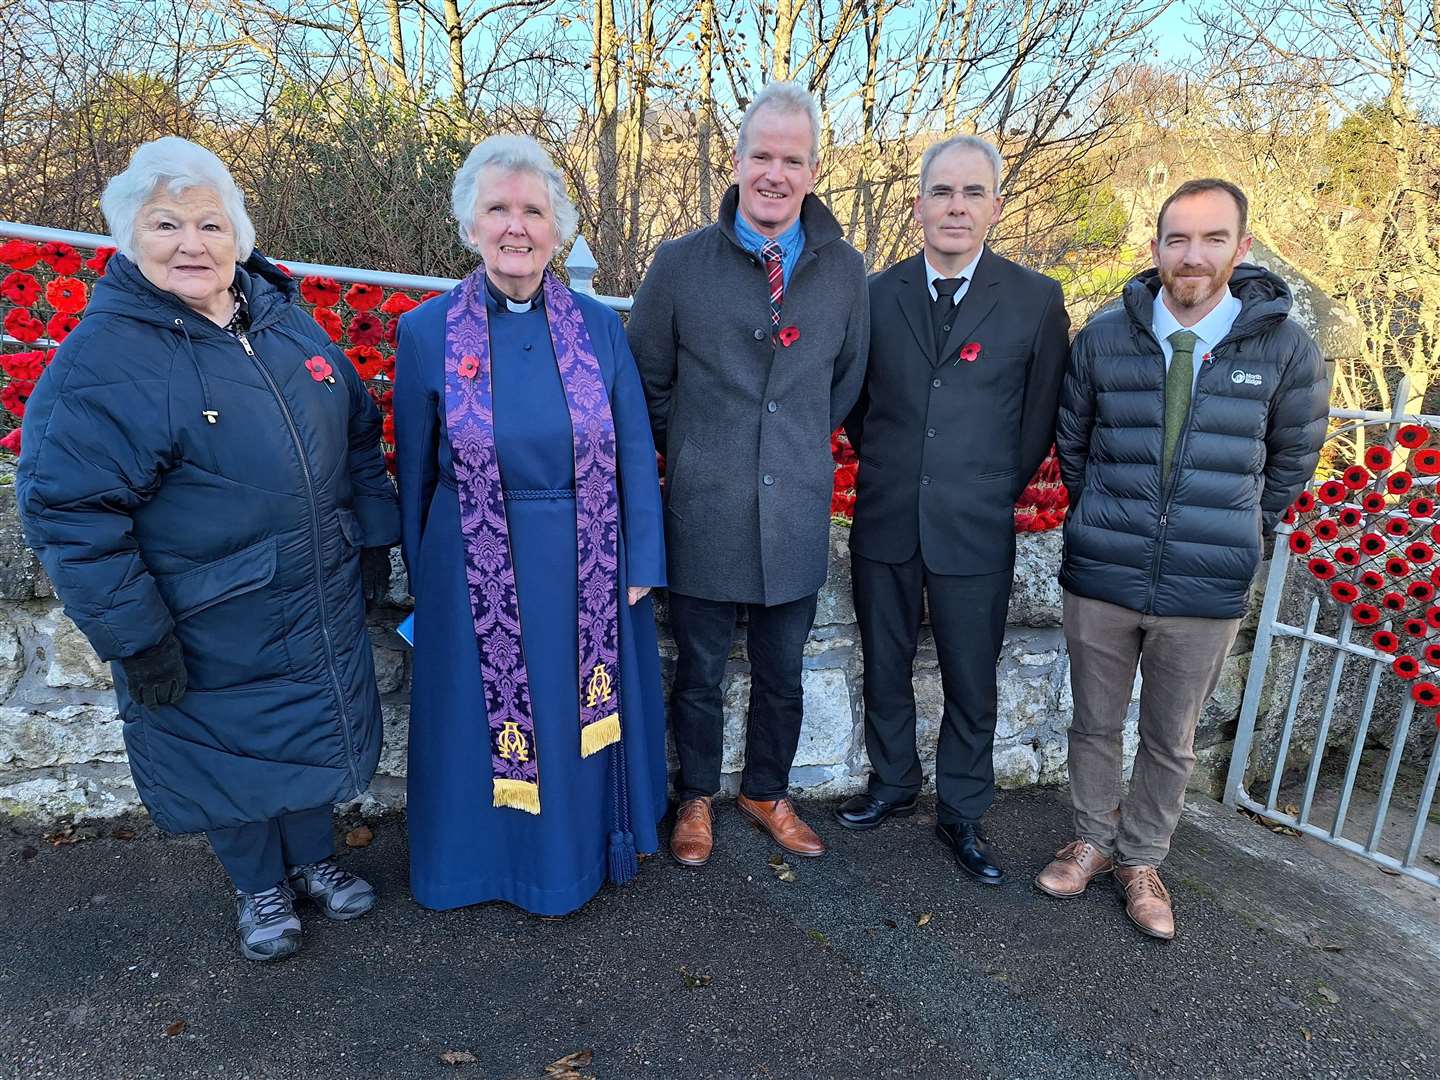 Eleanor Gordon, second left, locum Church of Scotland minister at Brora, with, from left, Christine Port of the Roman Catholic Church who read from the Gospel of John; Angus Millar and David Roberts of the Free Church who led the hymns; and Ricky Macdonald of the Free Church who said a prayer.